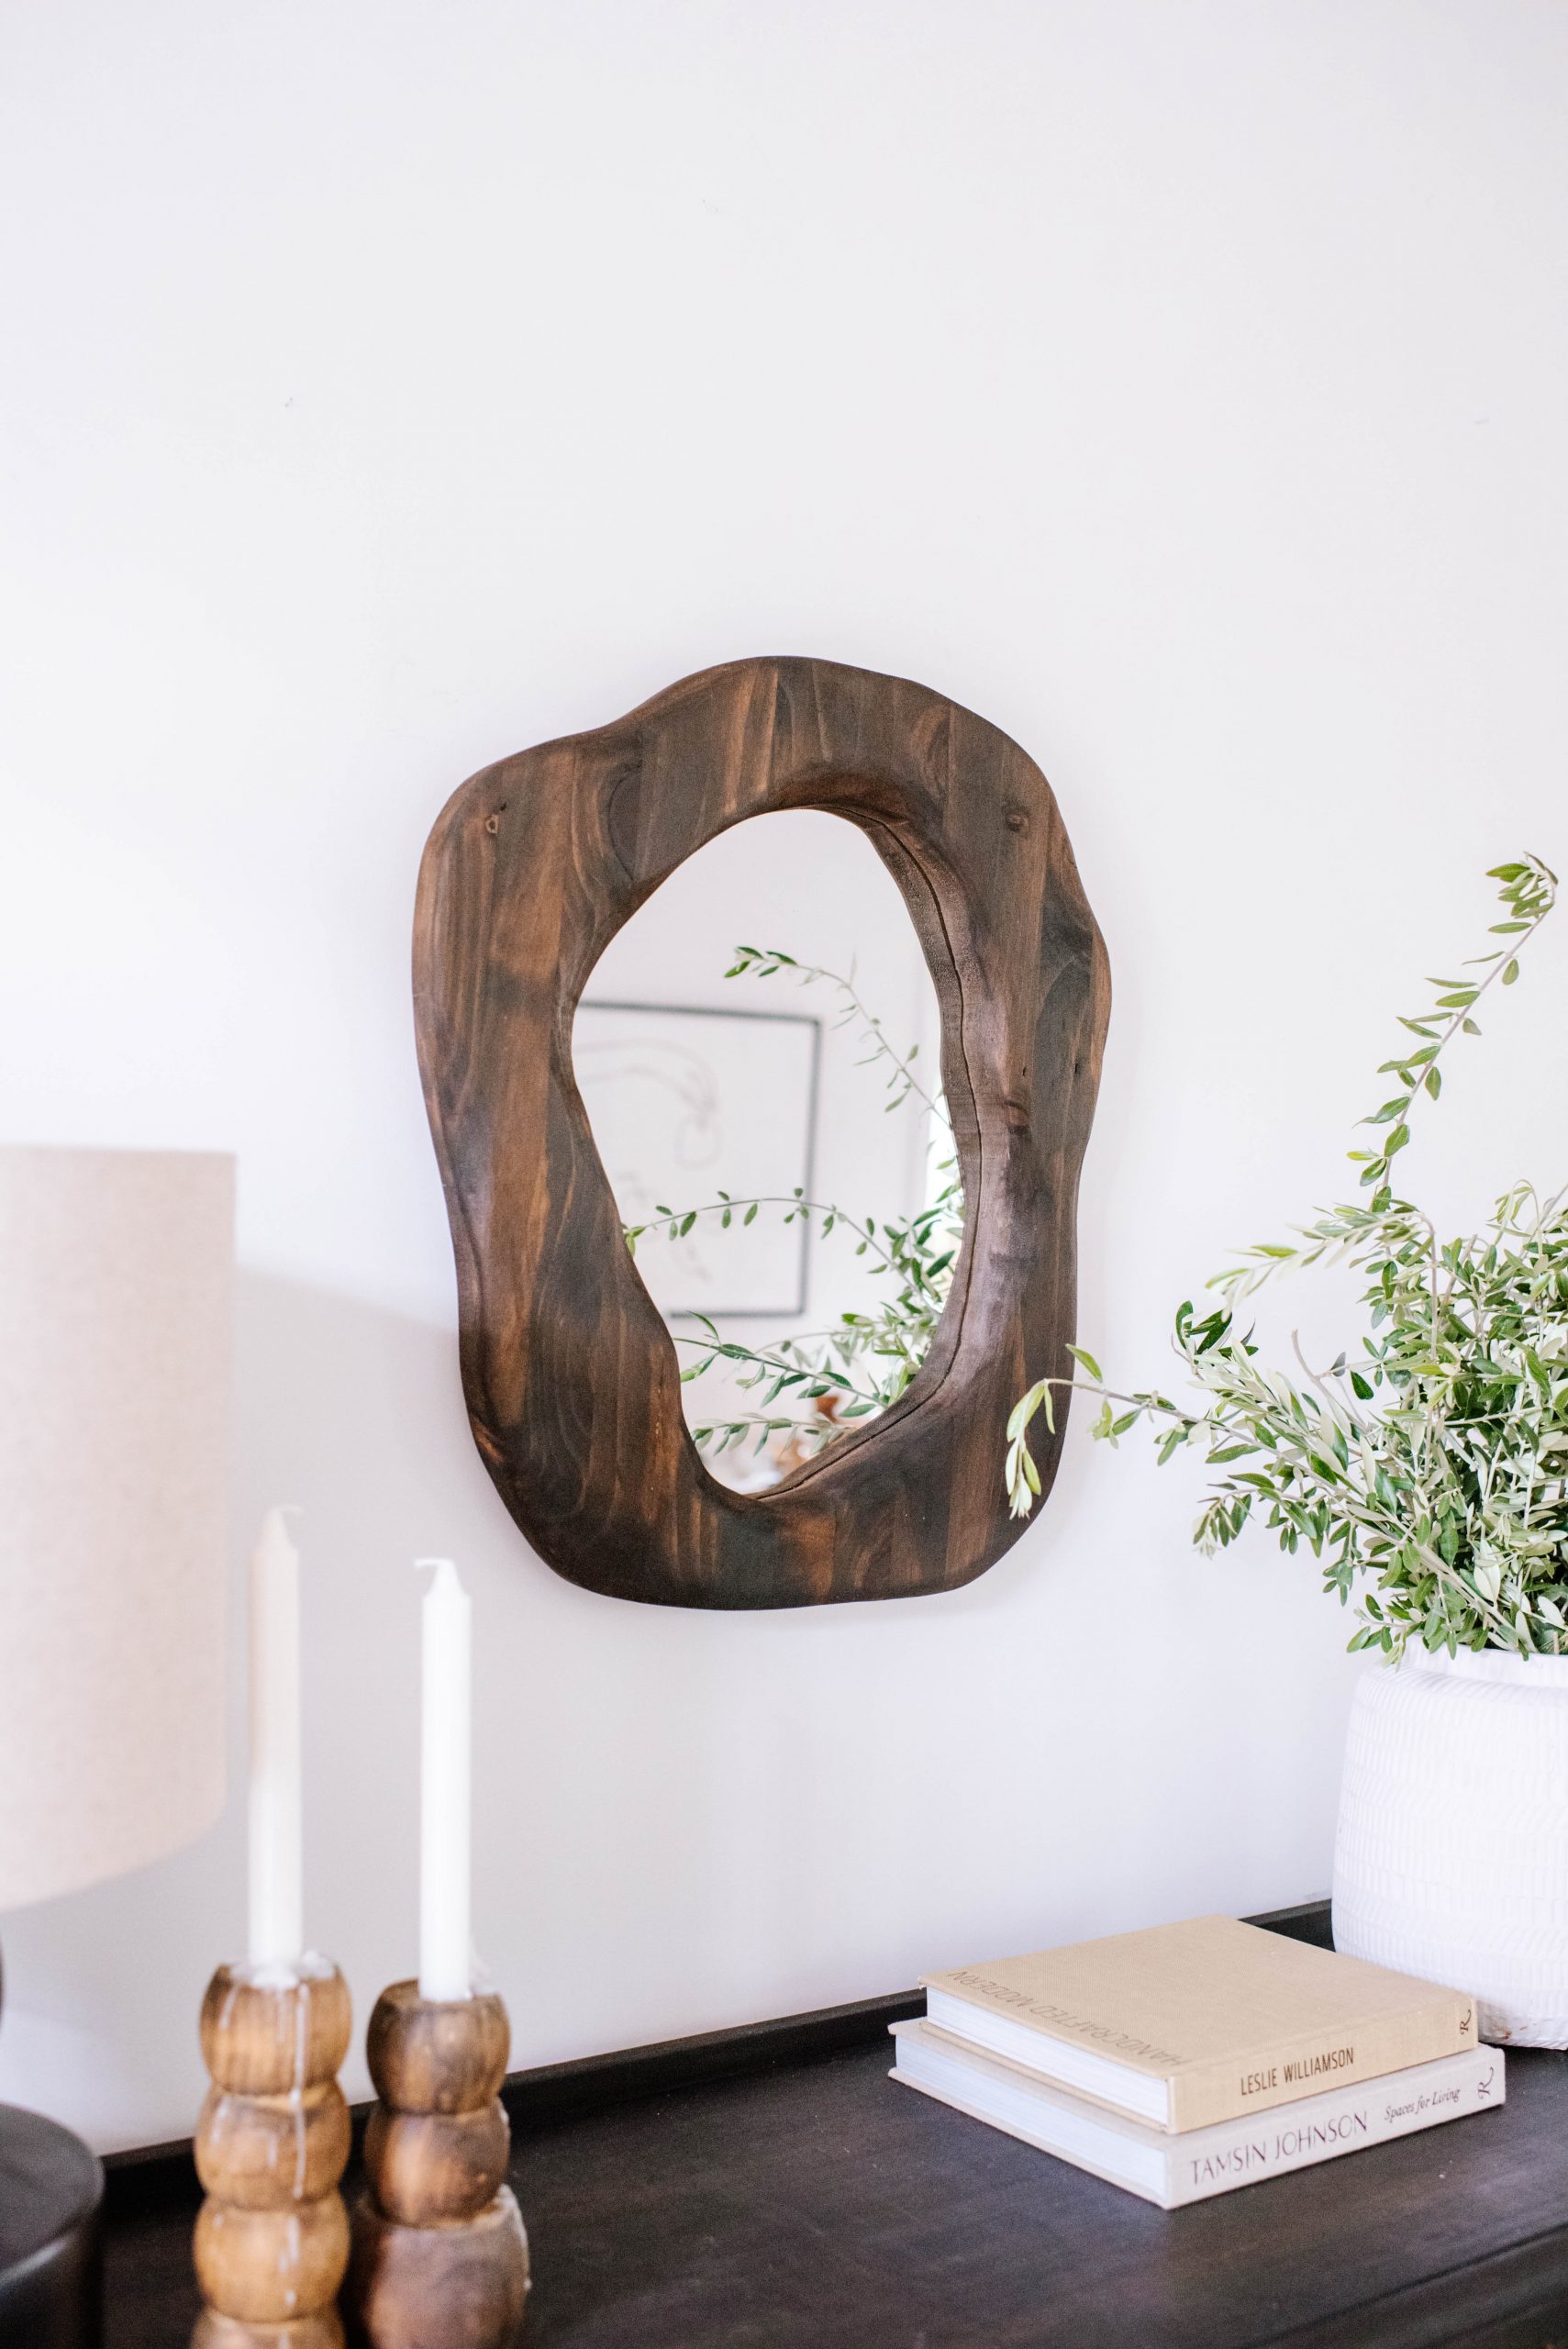 How to Make an Organic Shaped Wooden Mirror